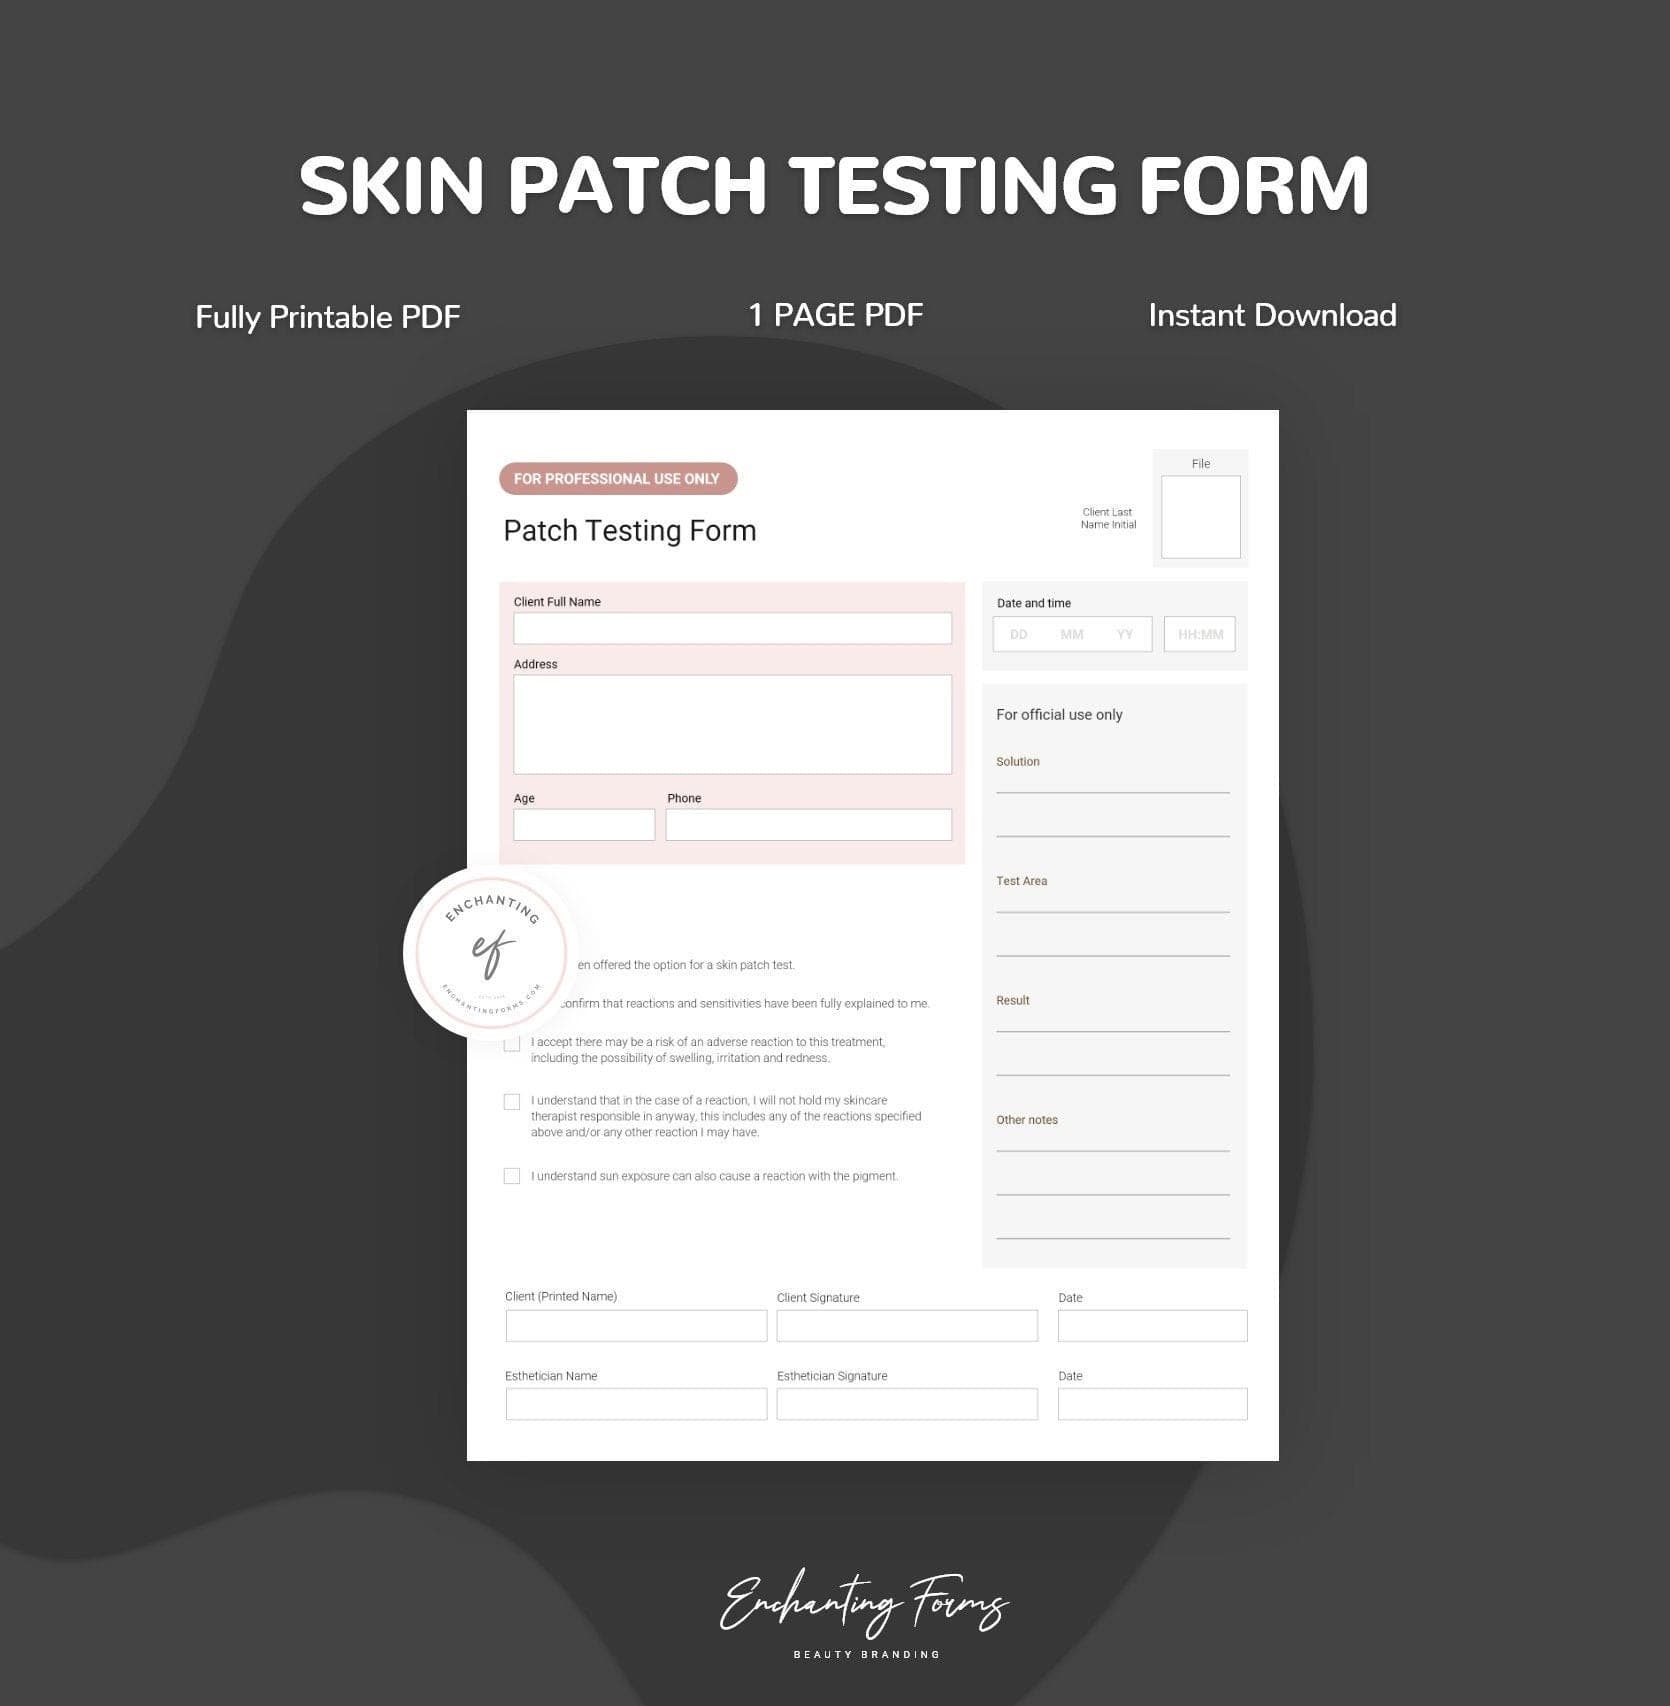 Patch Testing Form for Esthetician